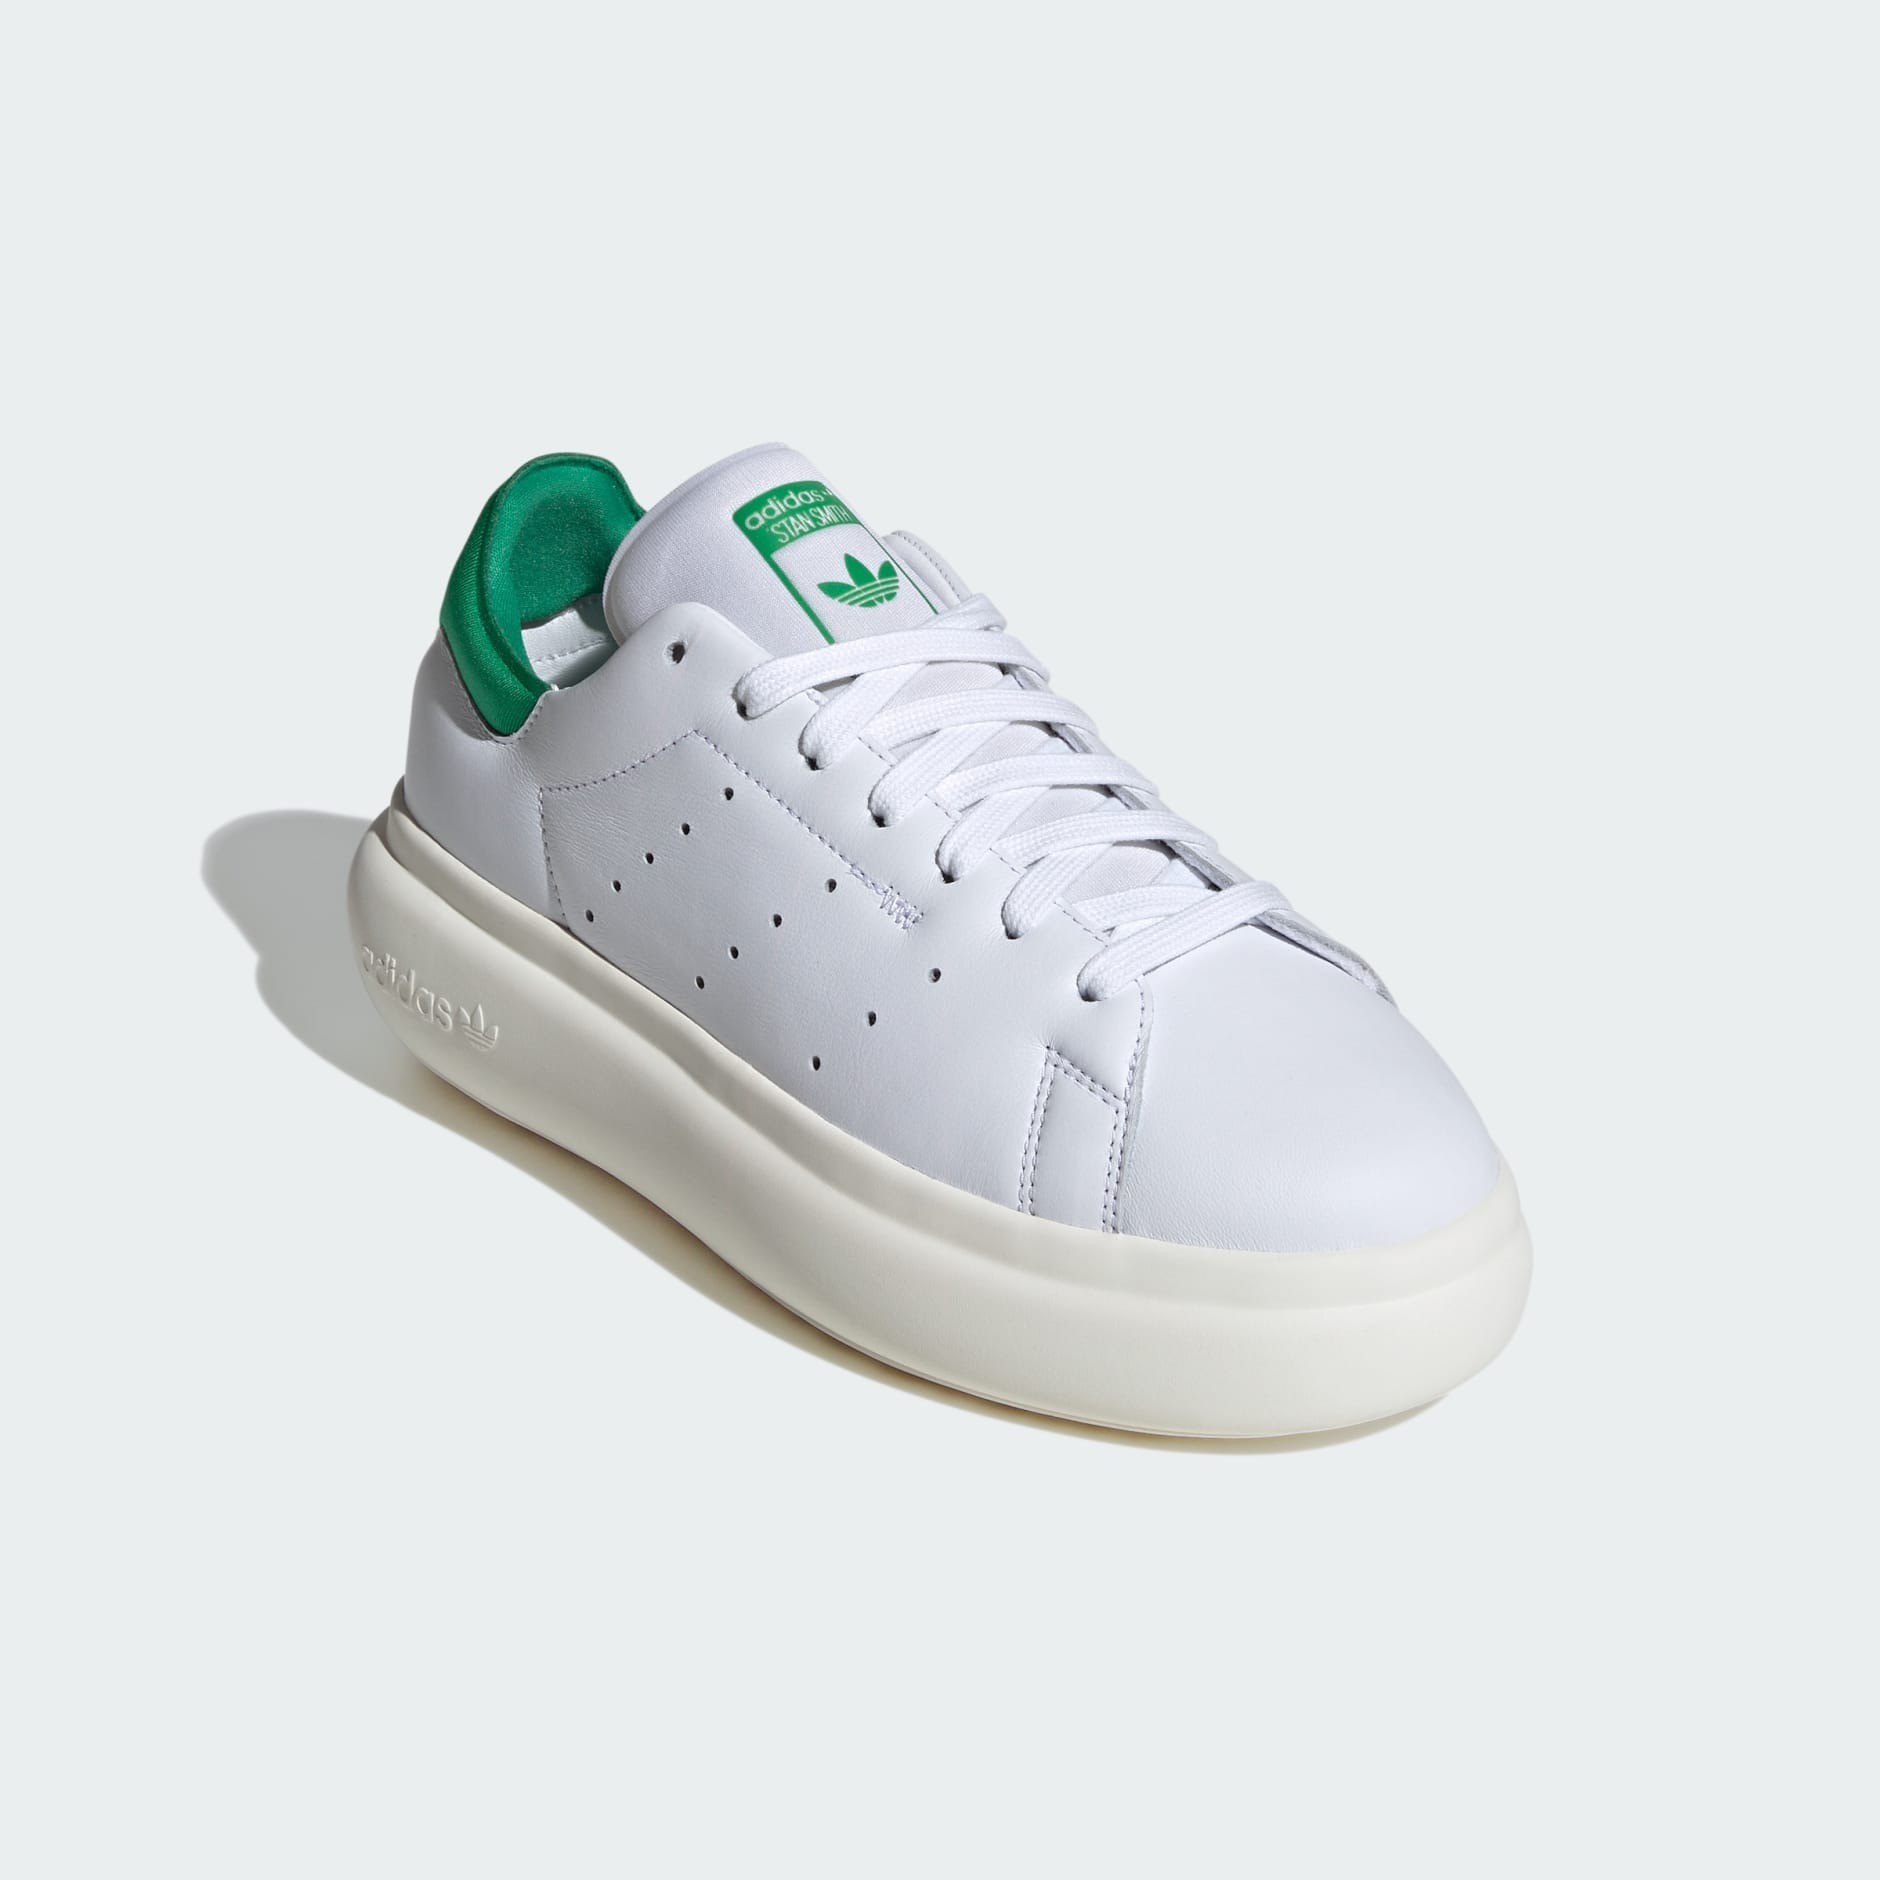 adidas' platform stan smith sneaker in white and green leather